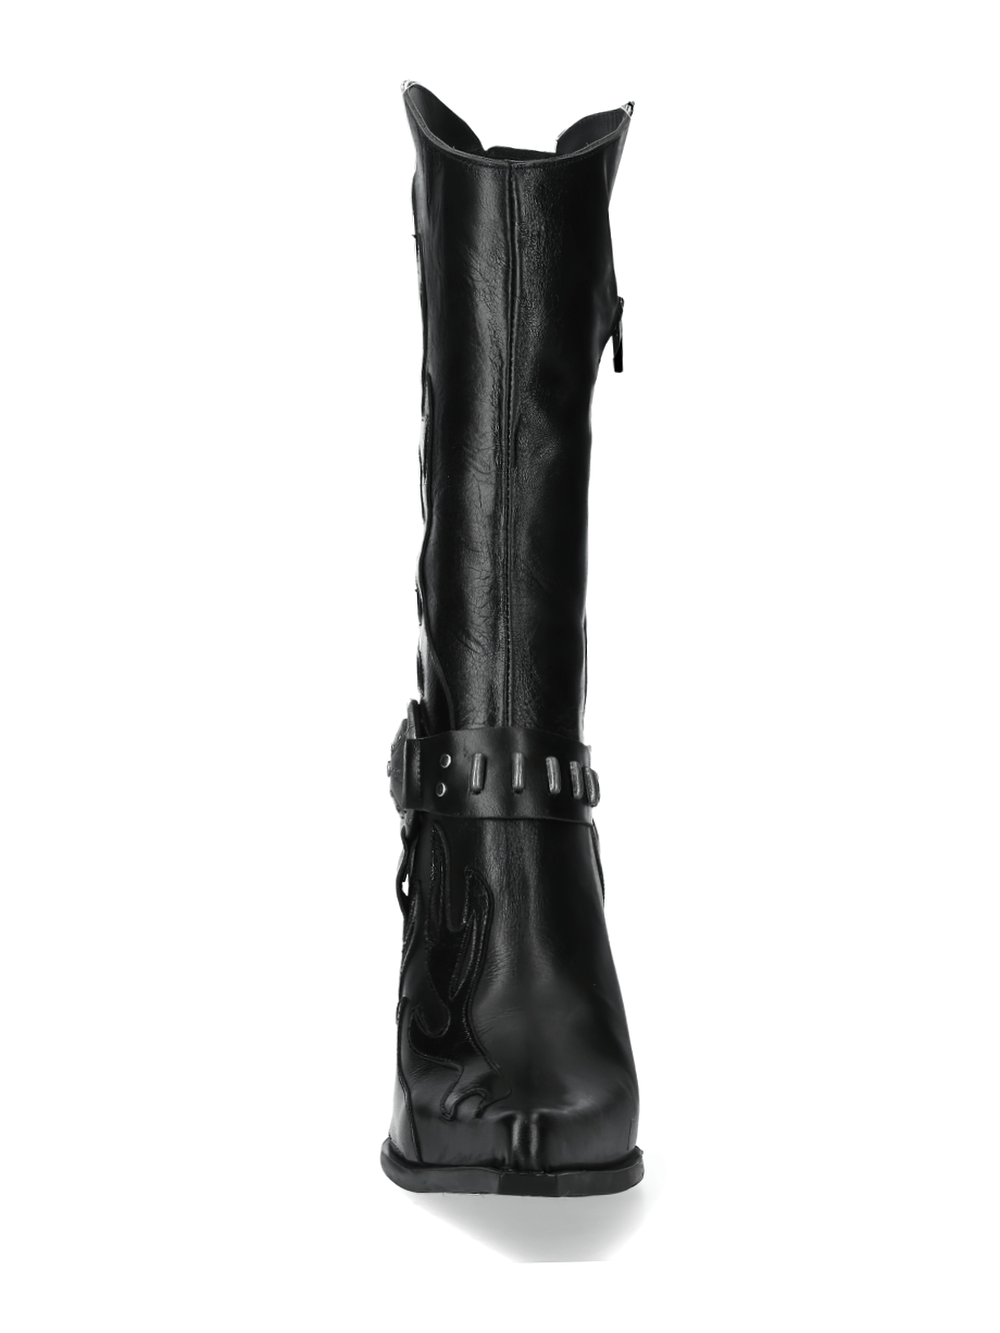 NEW ROCK Elegant Black Western Boots with Metal Accents